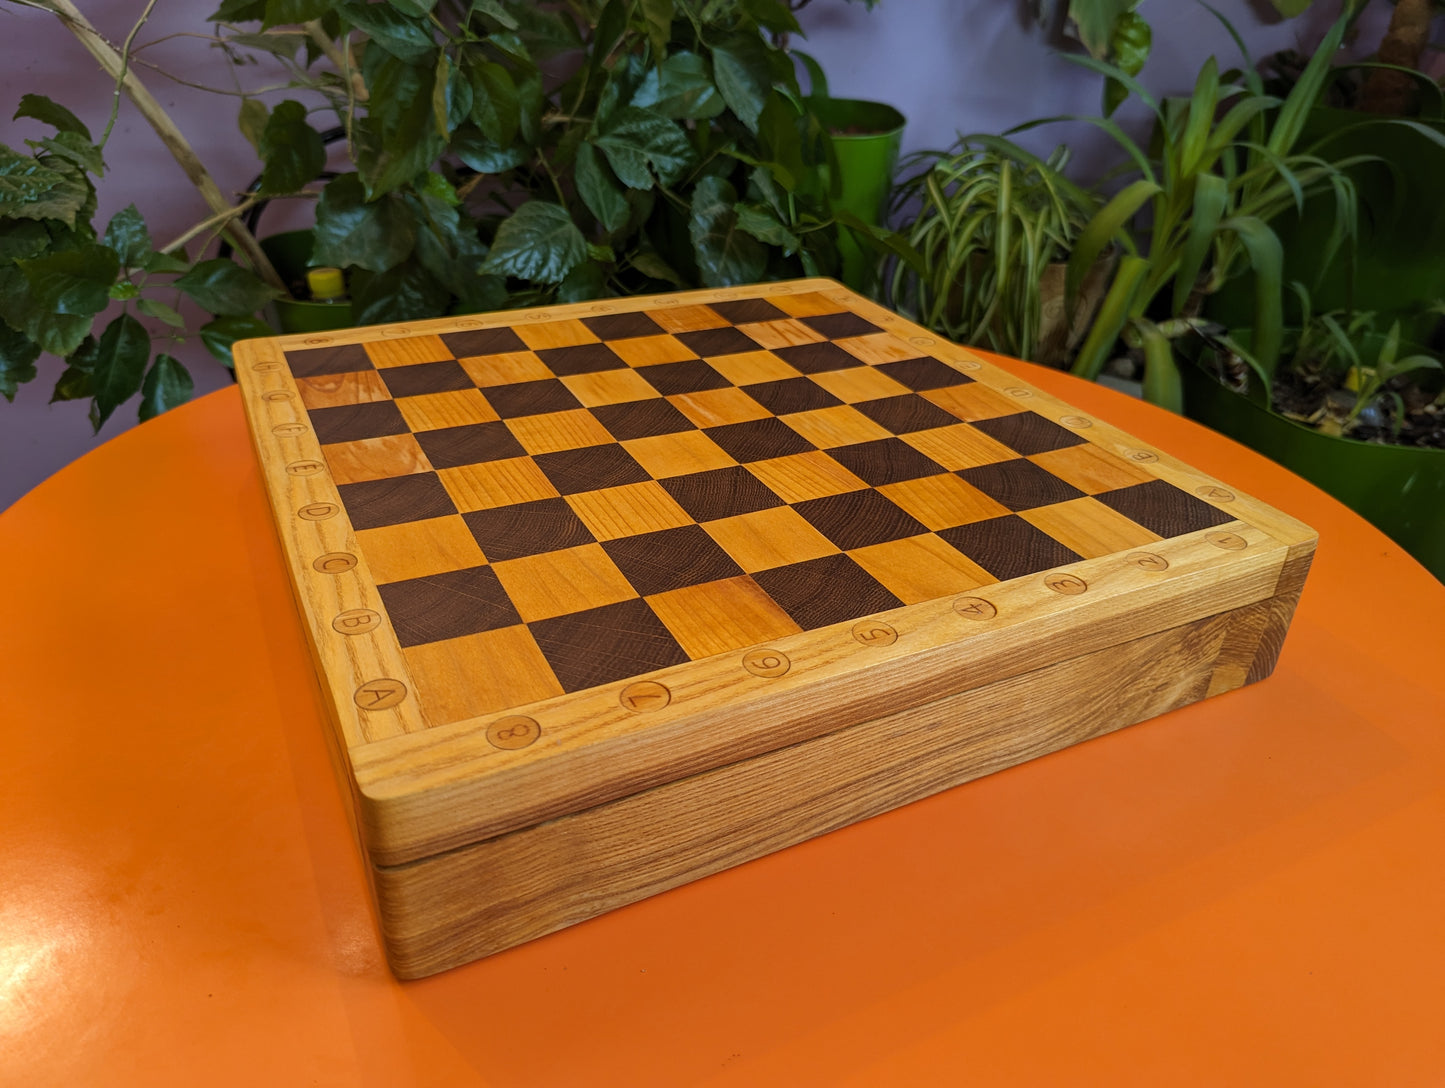 Handcrafted Chess Chest with wooden carved chess pieces inside and with chessboard on top.